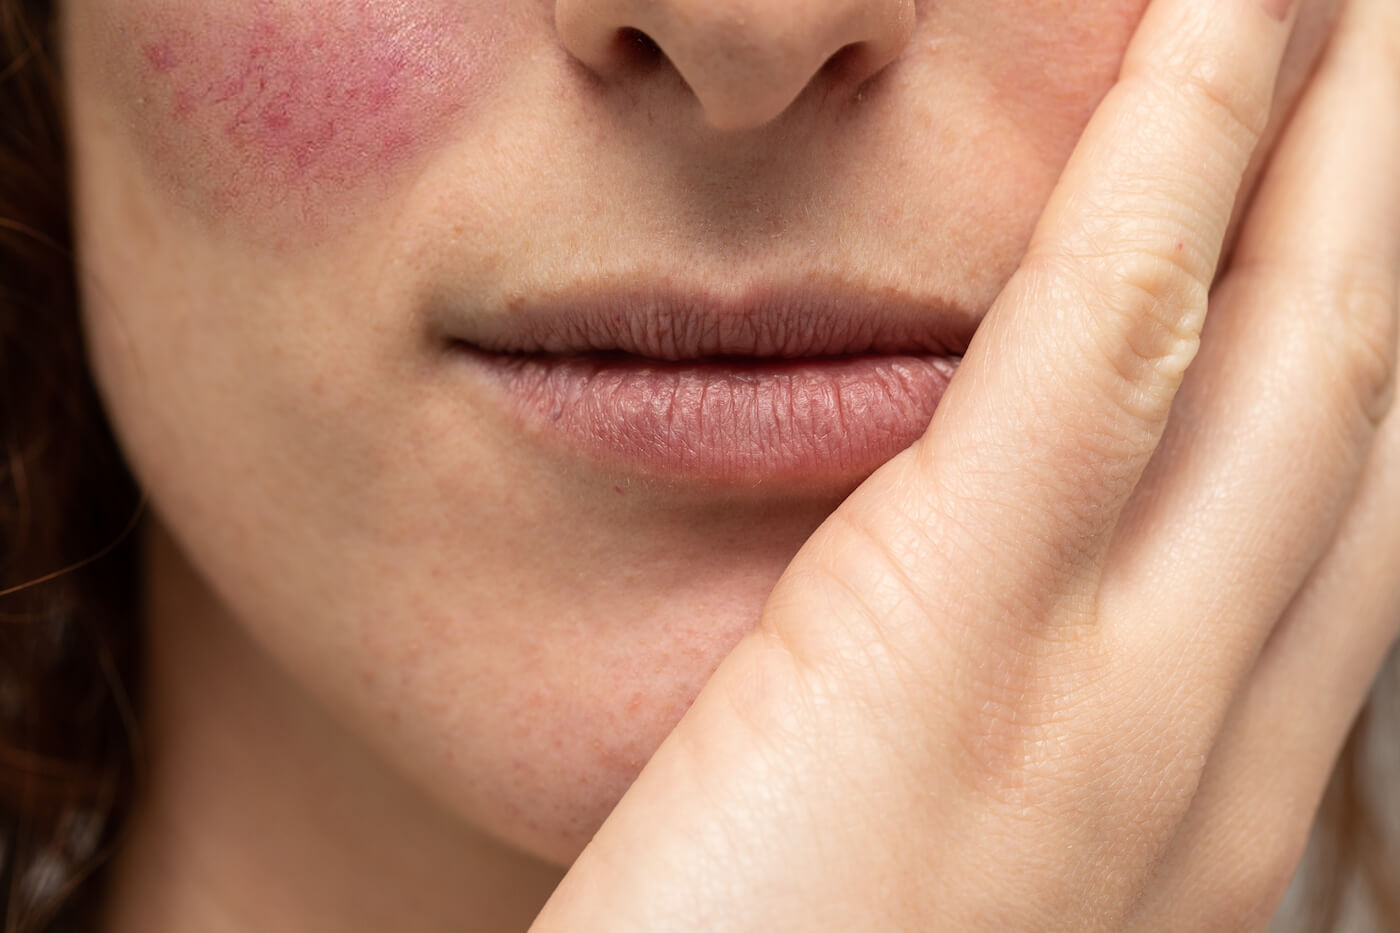 type 1 rosacea - A close up view on a caucasian woman resting her chin on hand, with visible cracked lips and type 1 rosacea